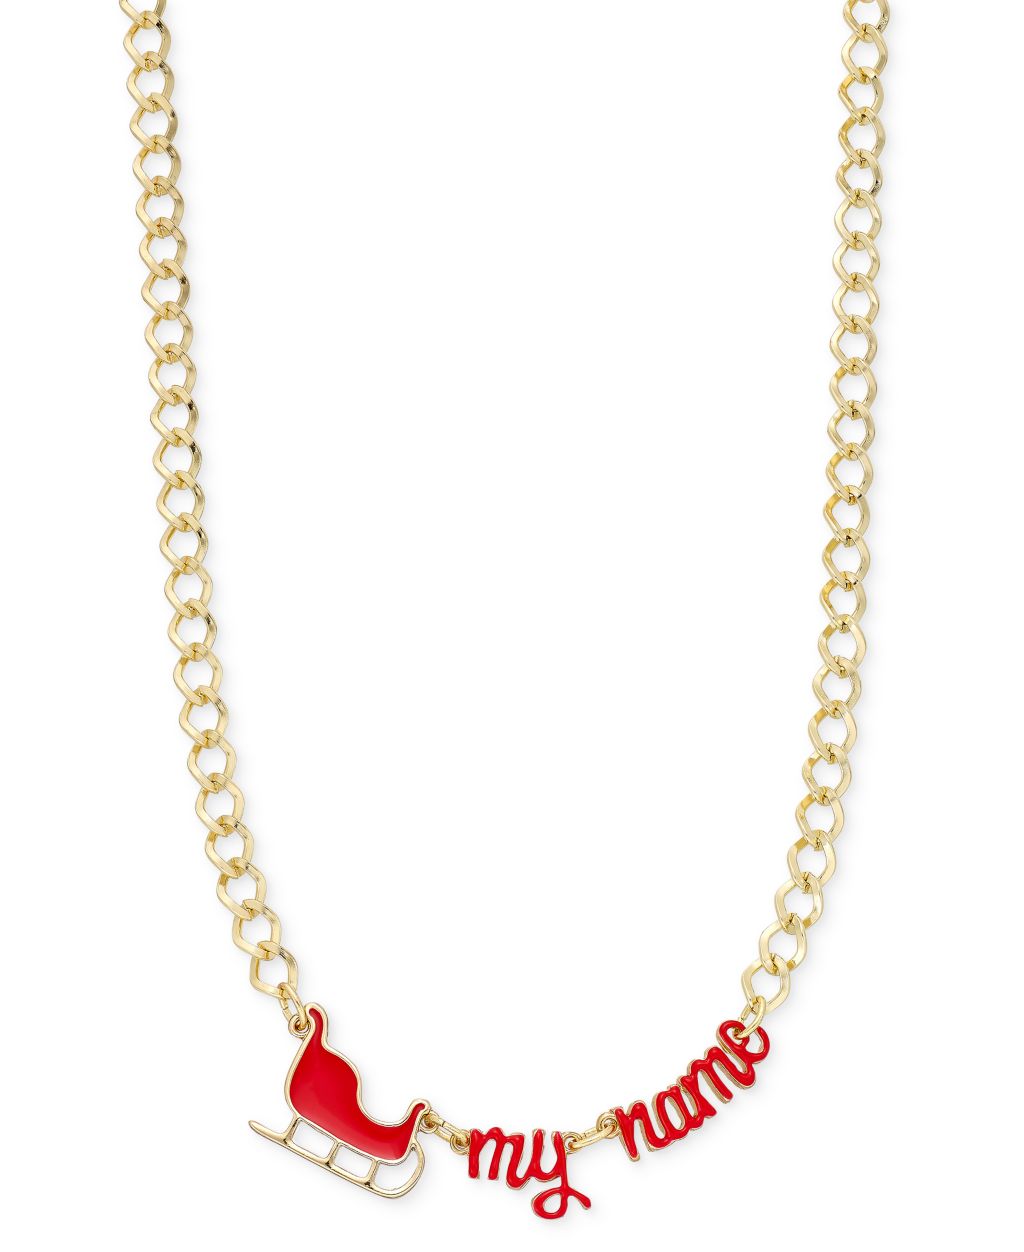 Celebrate Shop Sleigh My Name Necklace